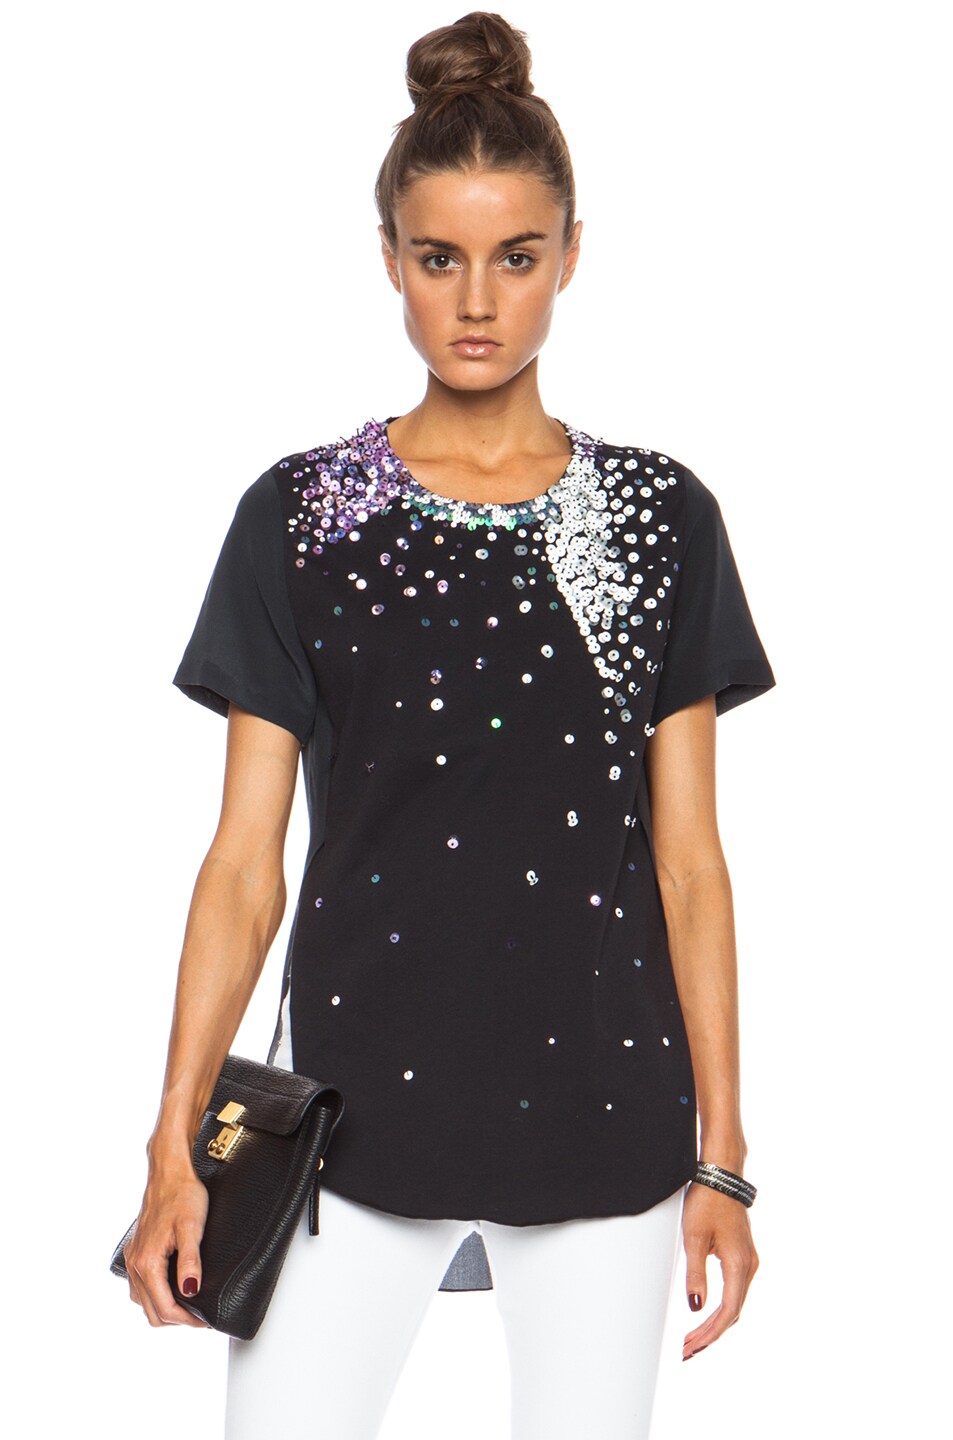 Image 1 of 3.1 phillip lim Embellished Overlapping Side Seam Tee in Soft Black